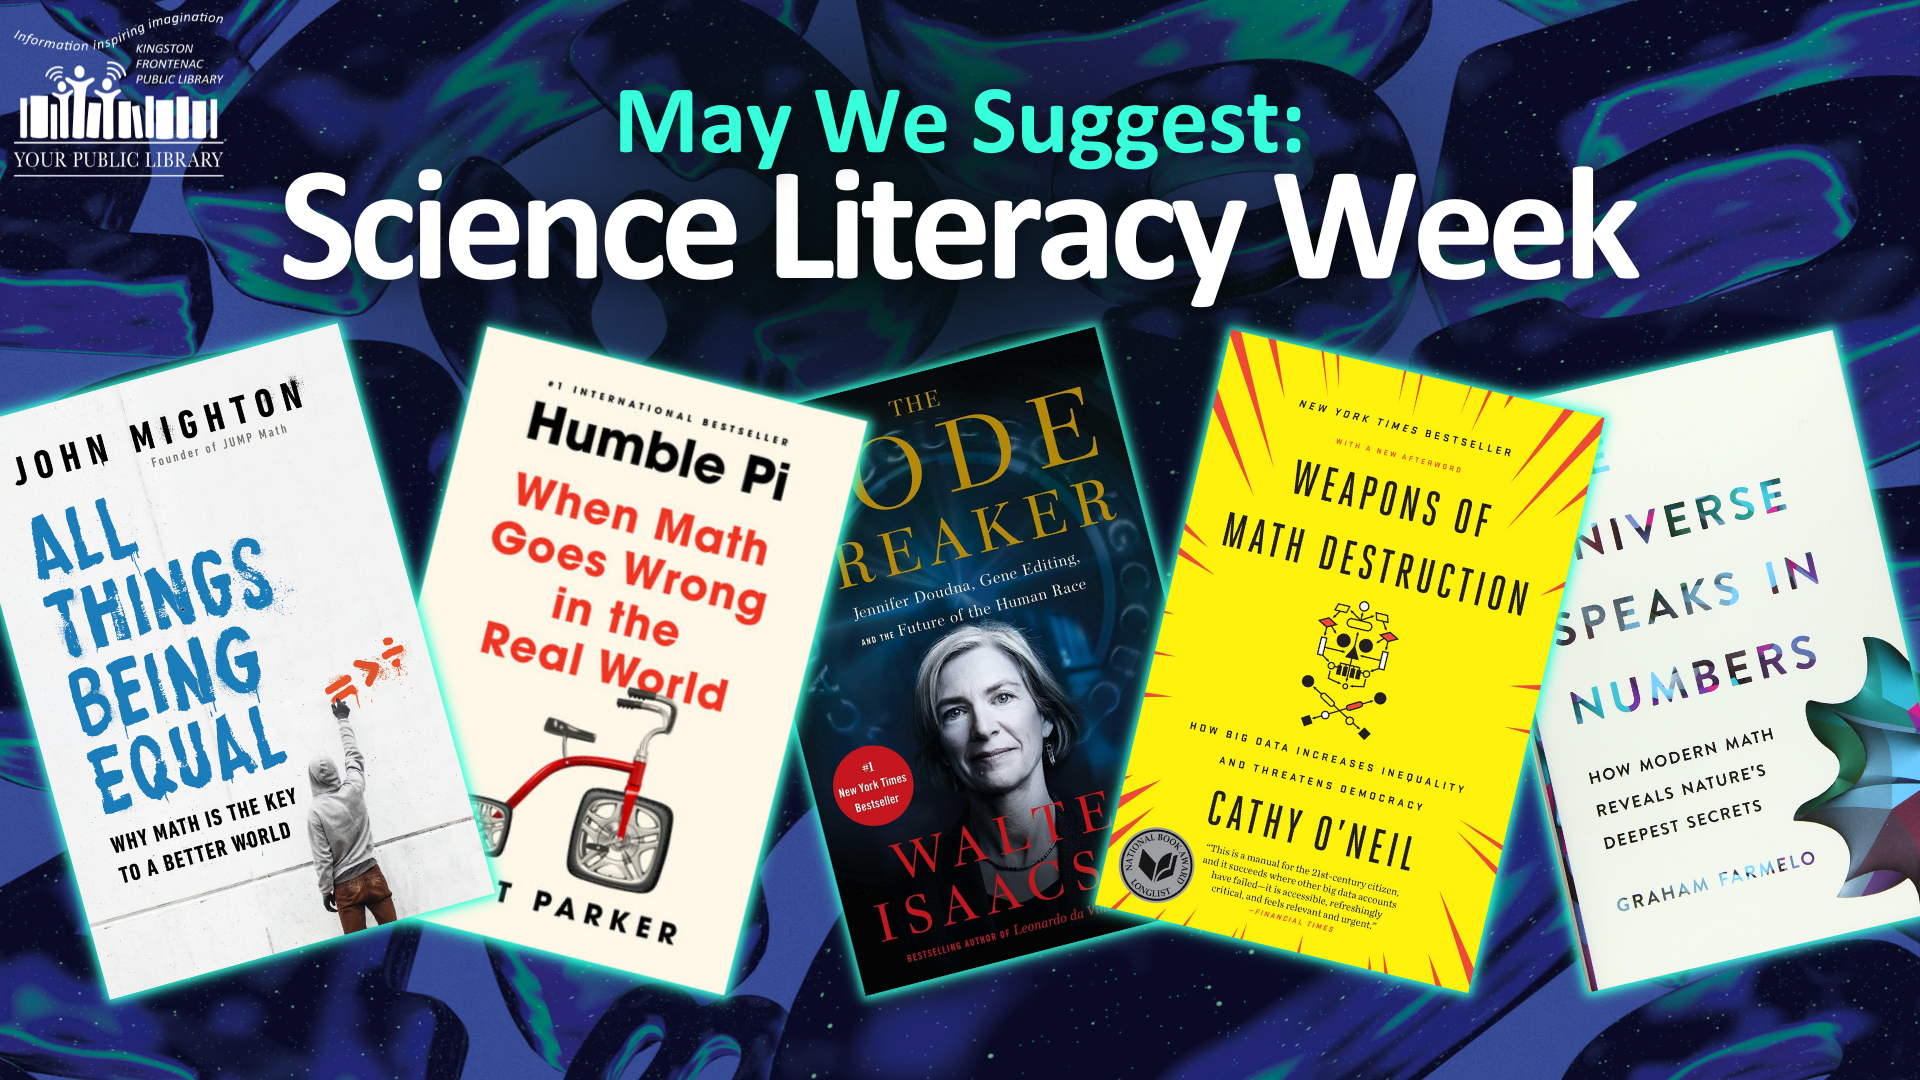 A collage of math-themed books against a blue swirling background with text reading May We Suggest: Science Literacy Week.